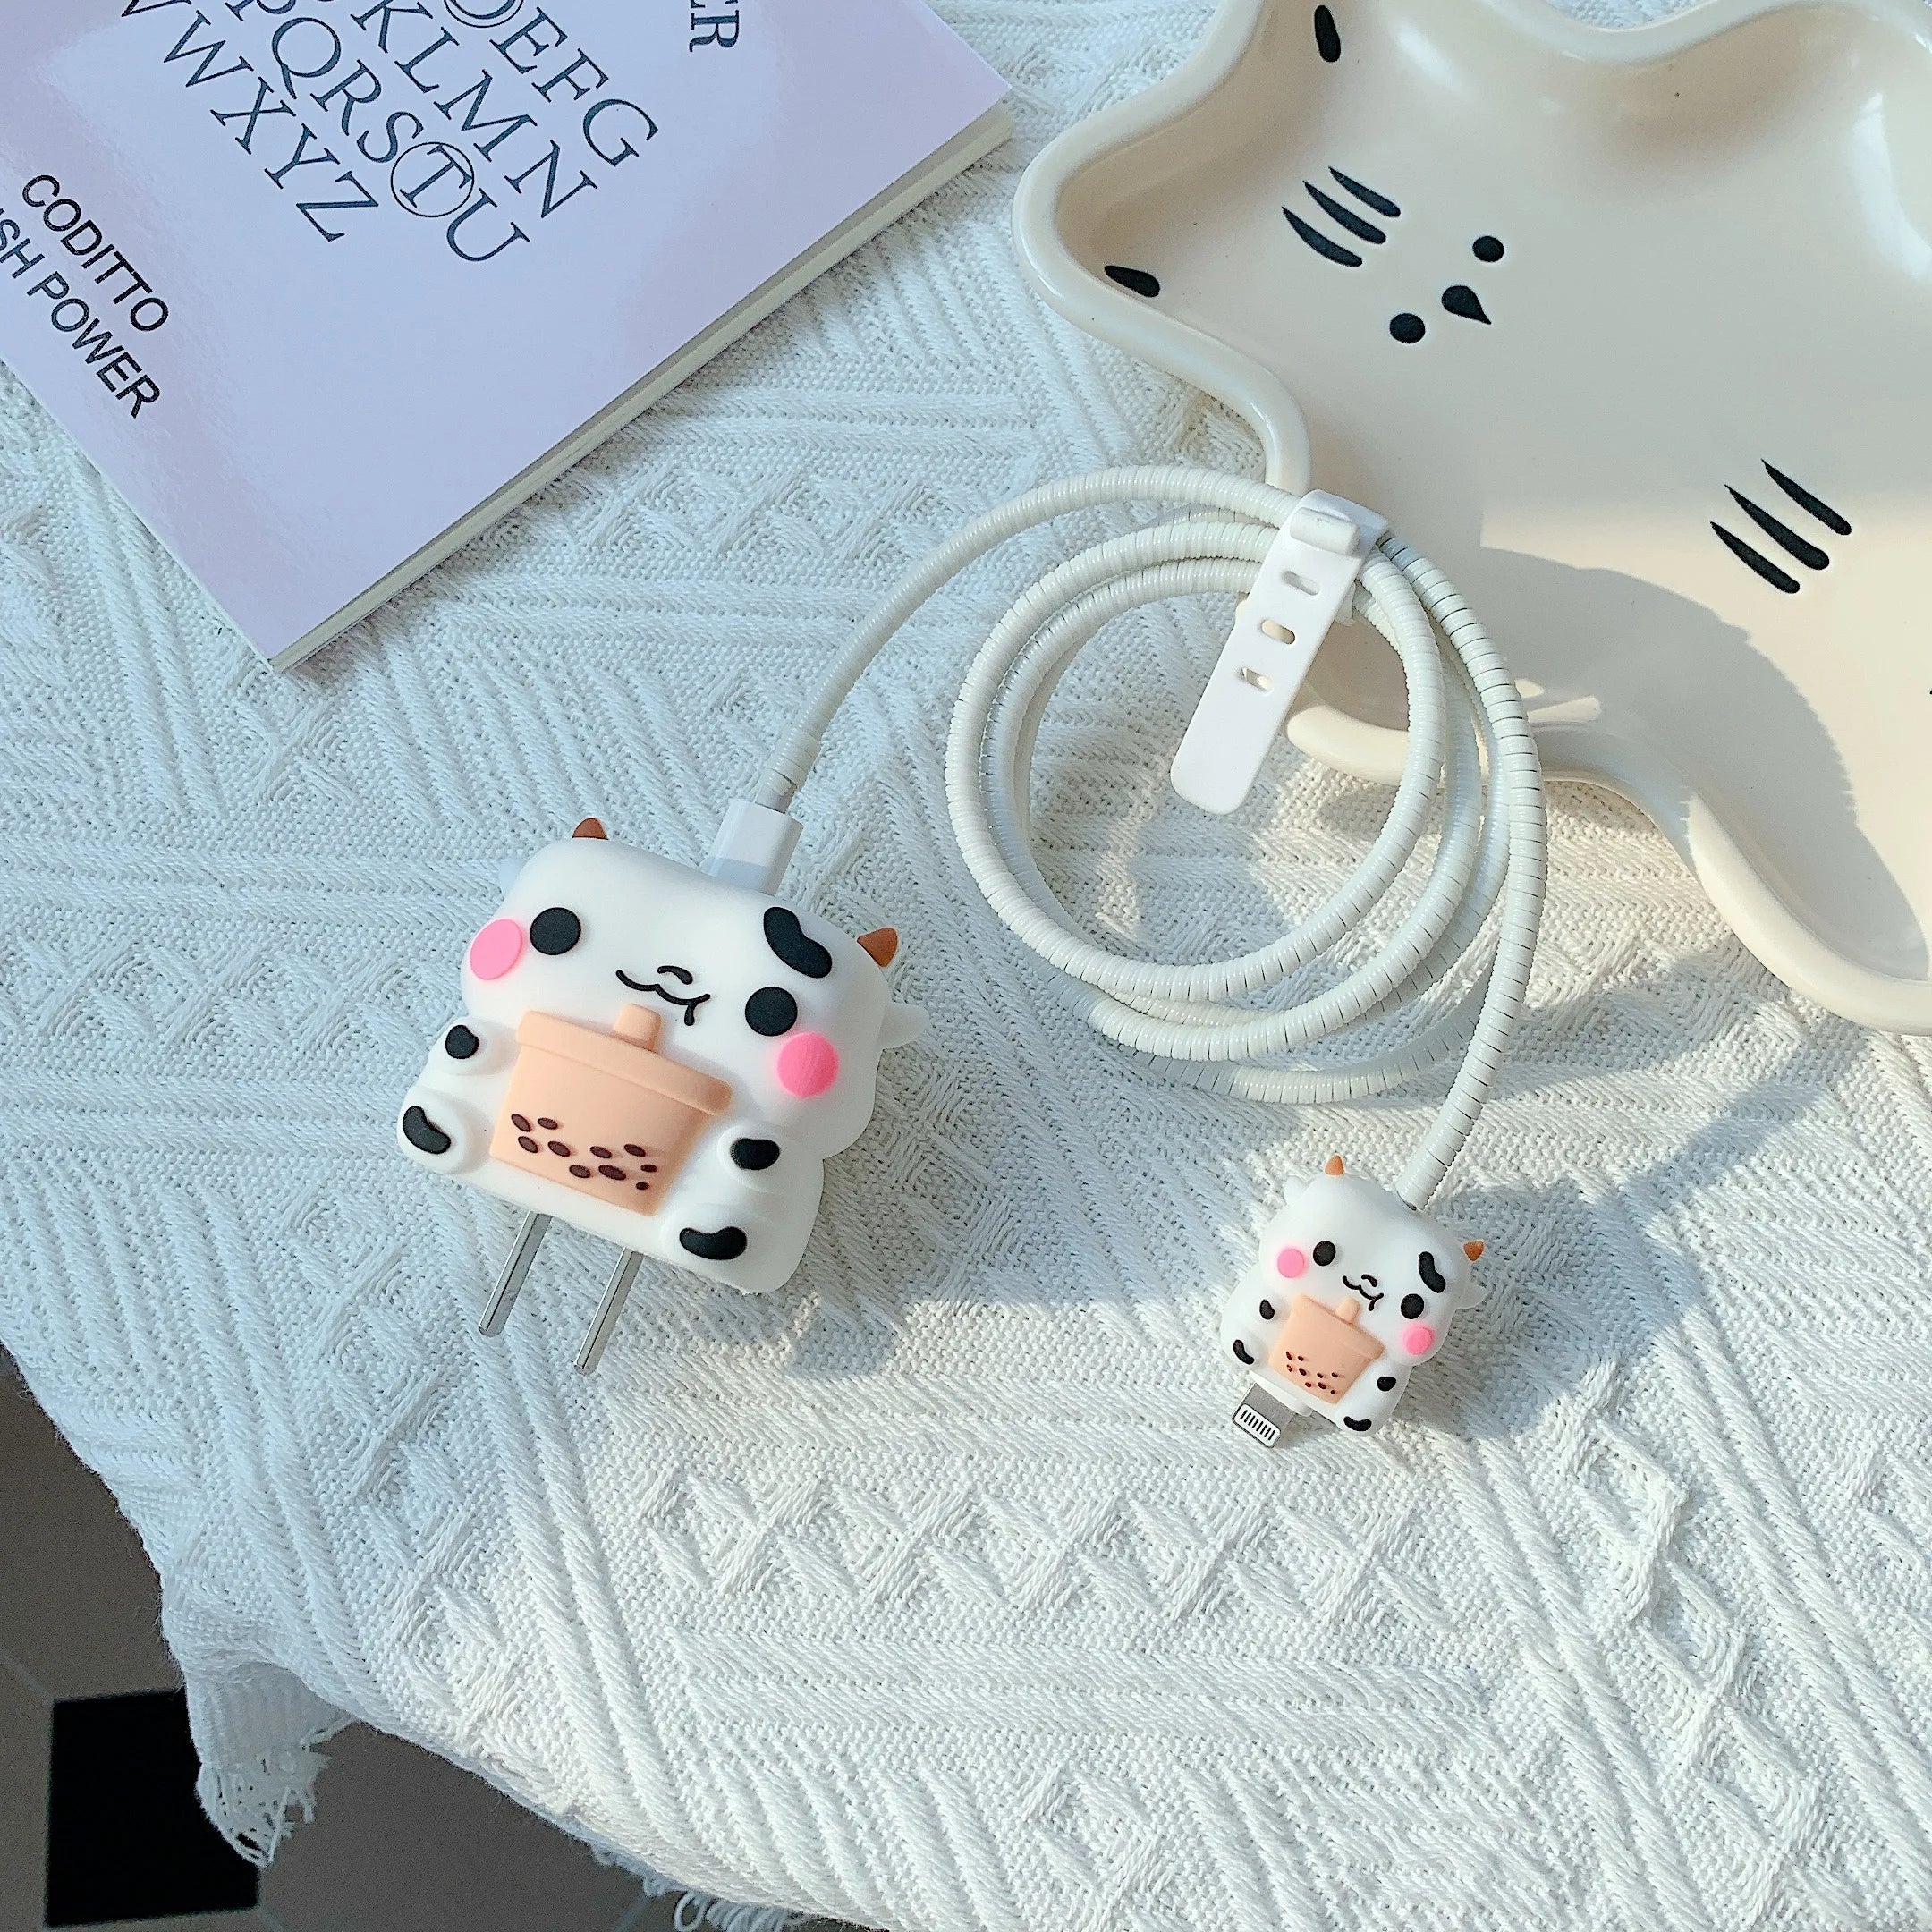 Iphone Charger Case Cover - Cutie Cow